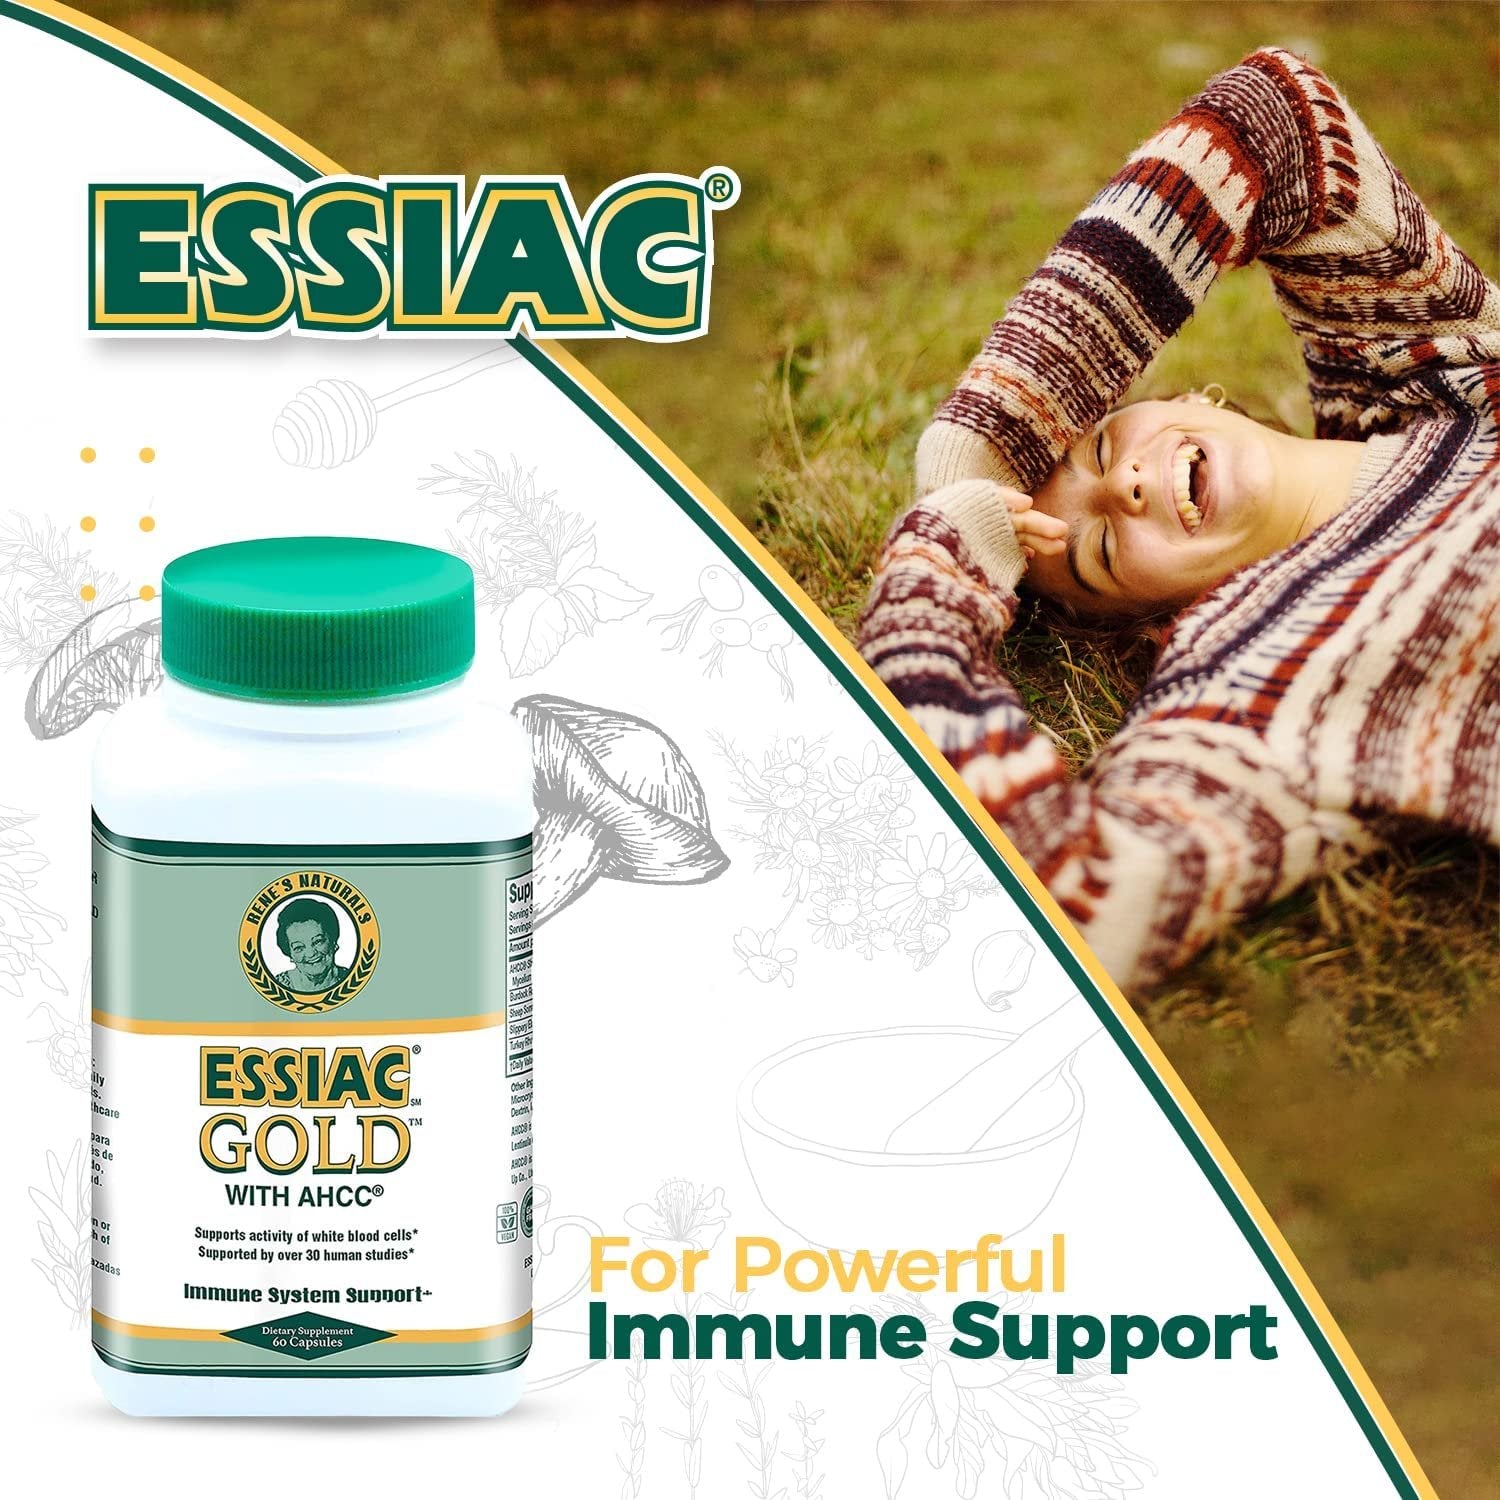 Essiac Gold Extract with AHCC Supplement Mushroom Extract for Enhanced Immune Support – 60 Capsules | Powerful Antioxidant Blend to Help Promote Overall Health & Well-Being